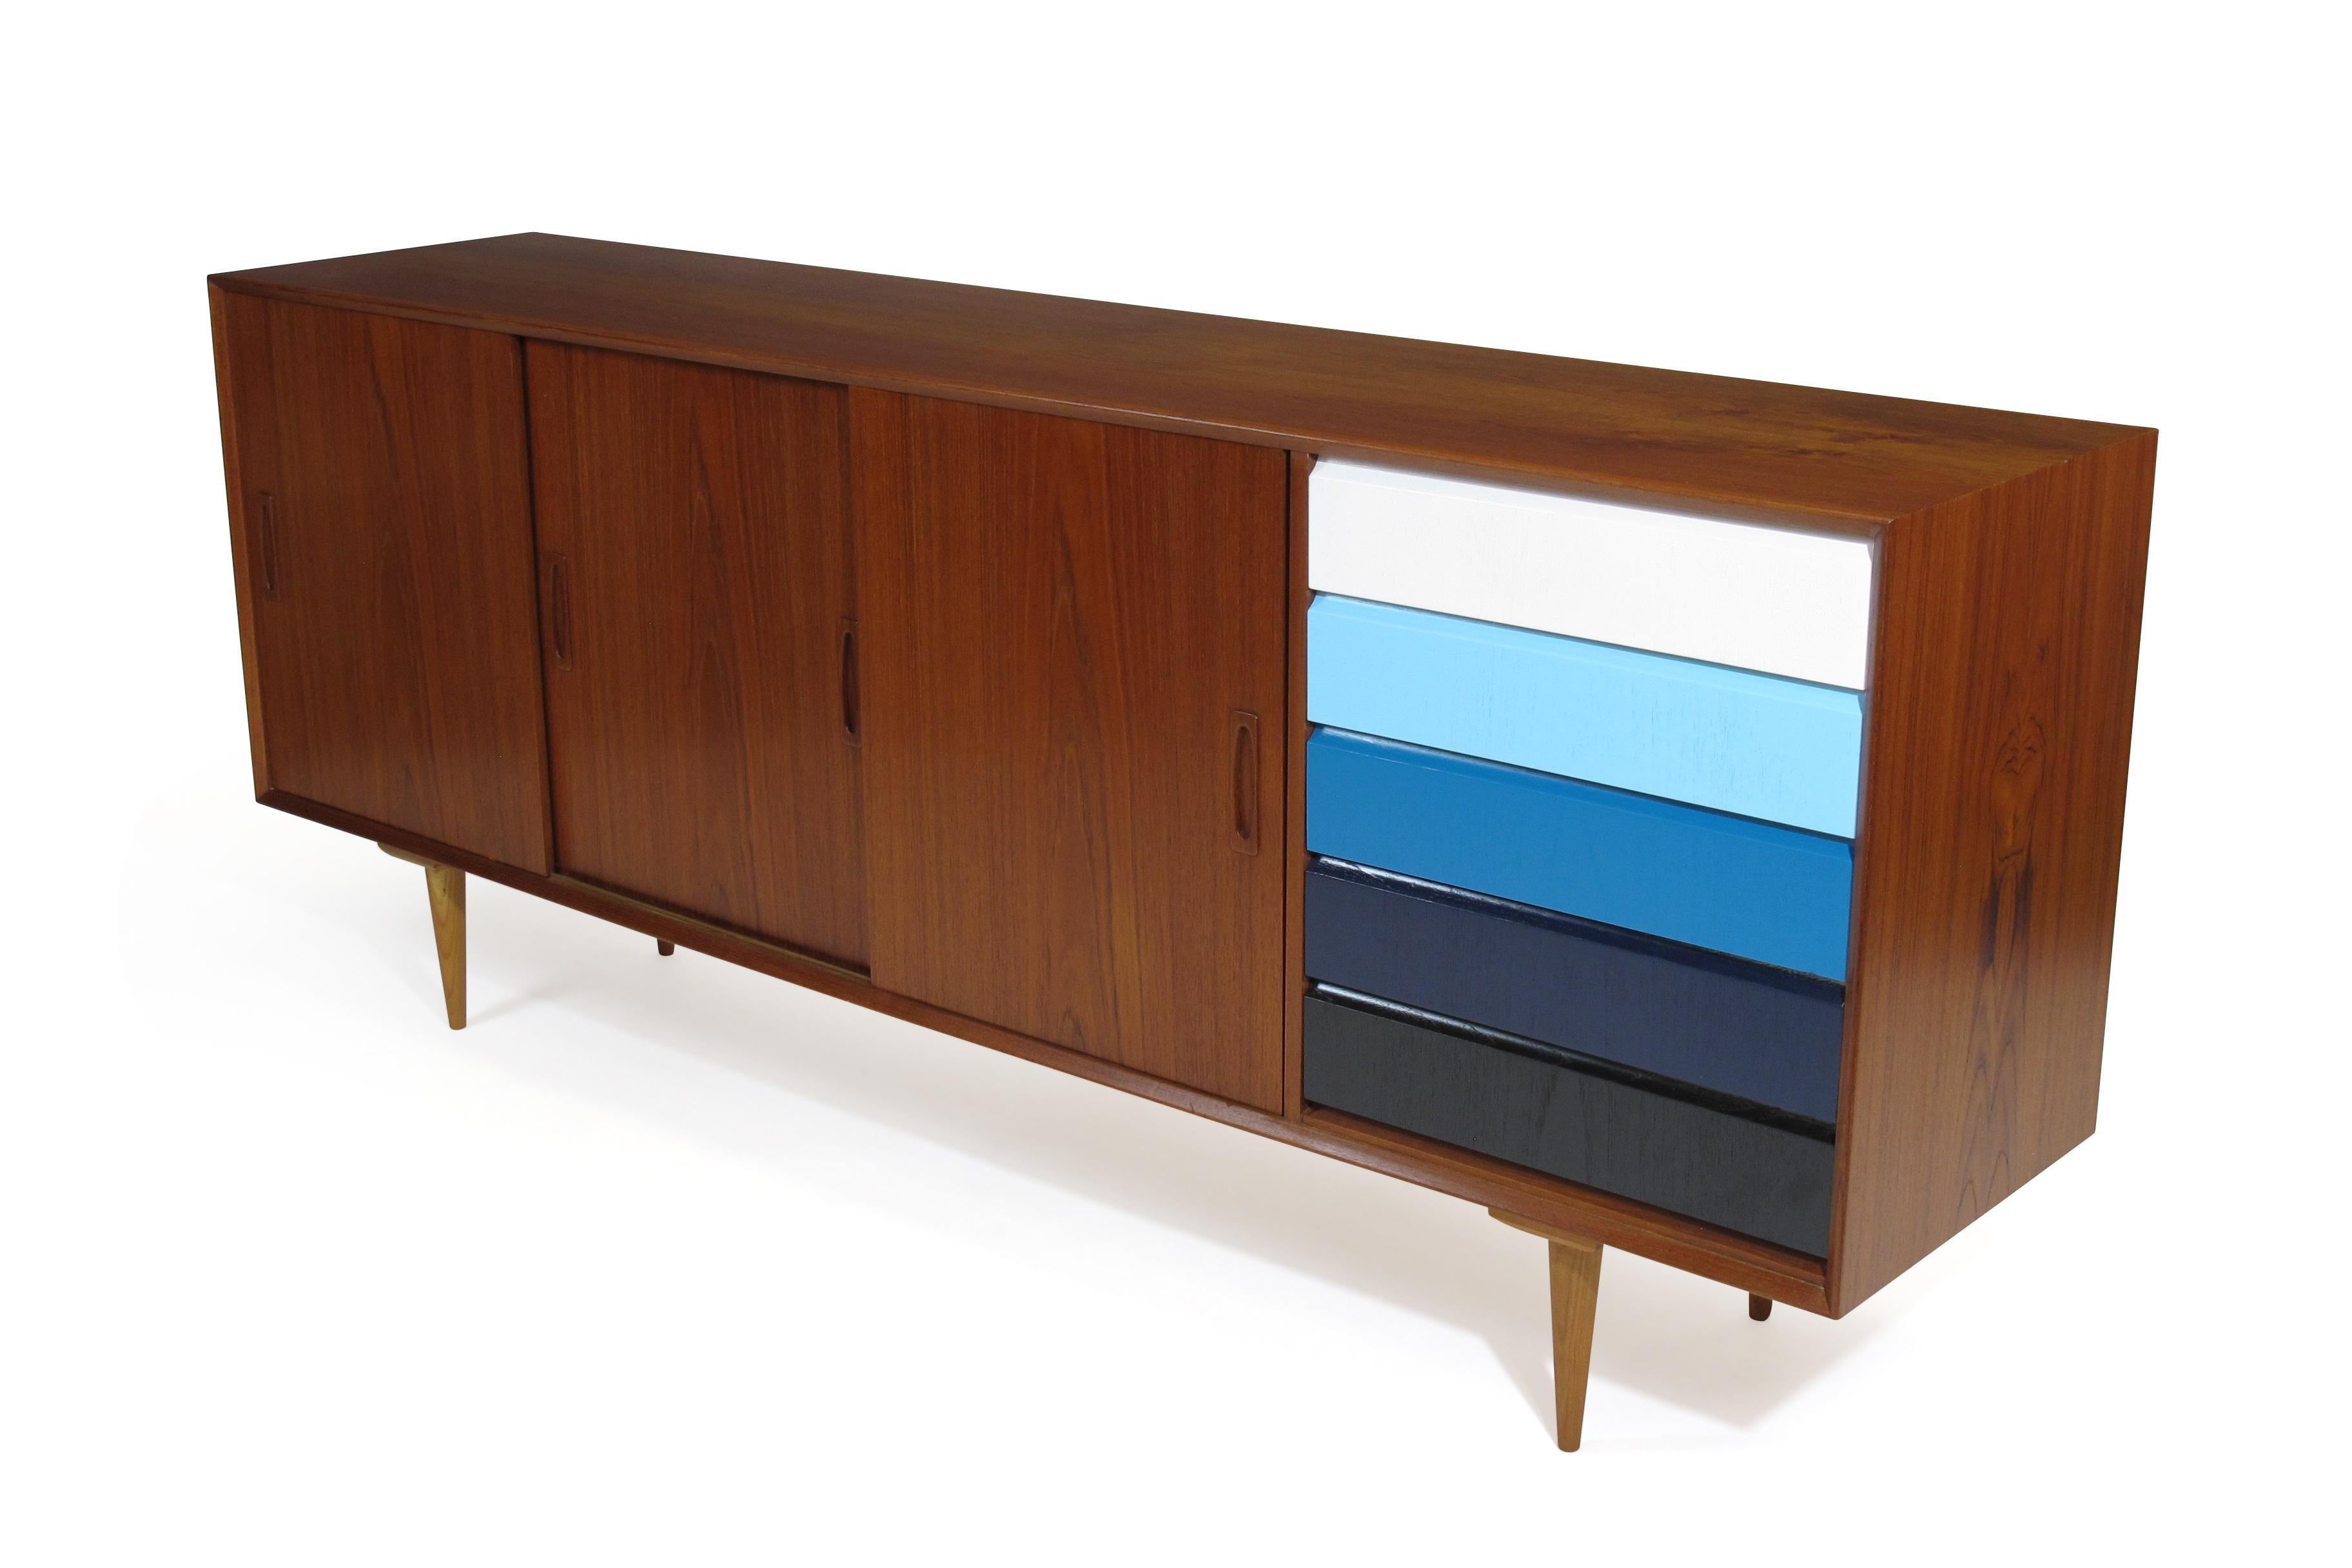 Danish Teak Credenza with Sliding Doors and Color Blocked Drawers